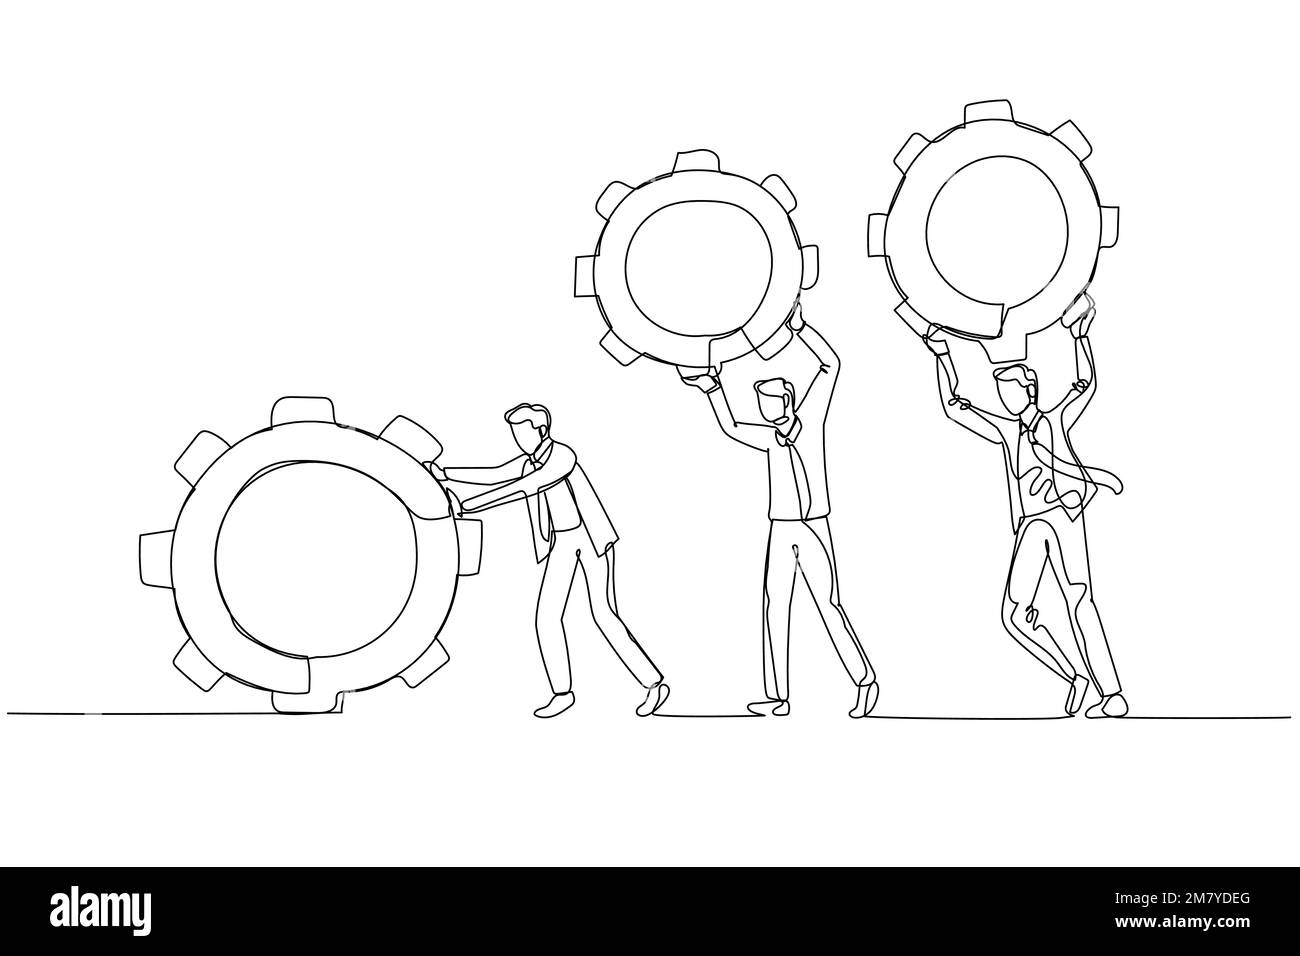 Drawing of businessman and colleague people holding cogwheels gear teamwork make dreamwork organization. Continuous line art style design Stock Vector